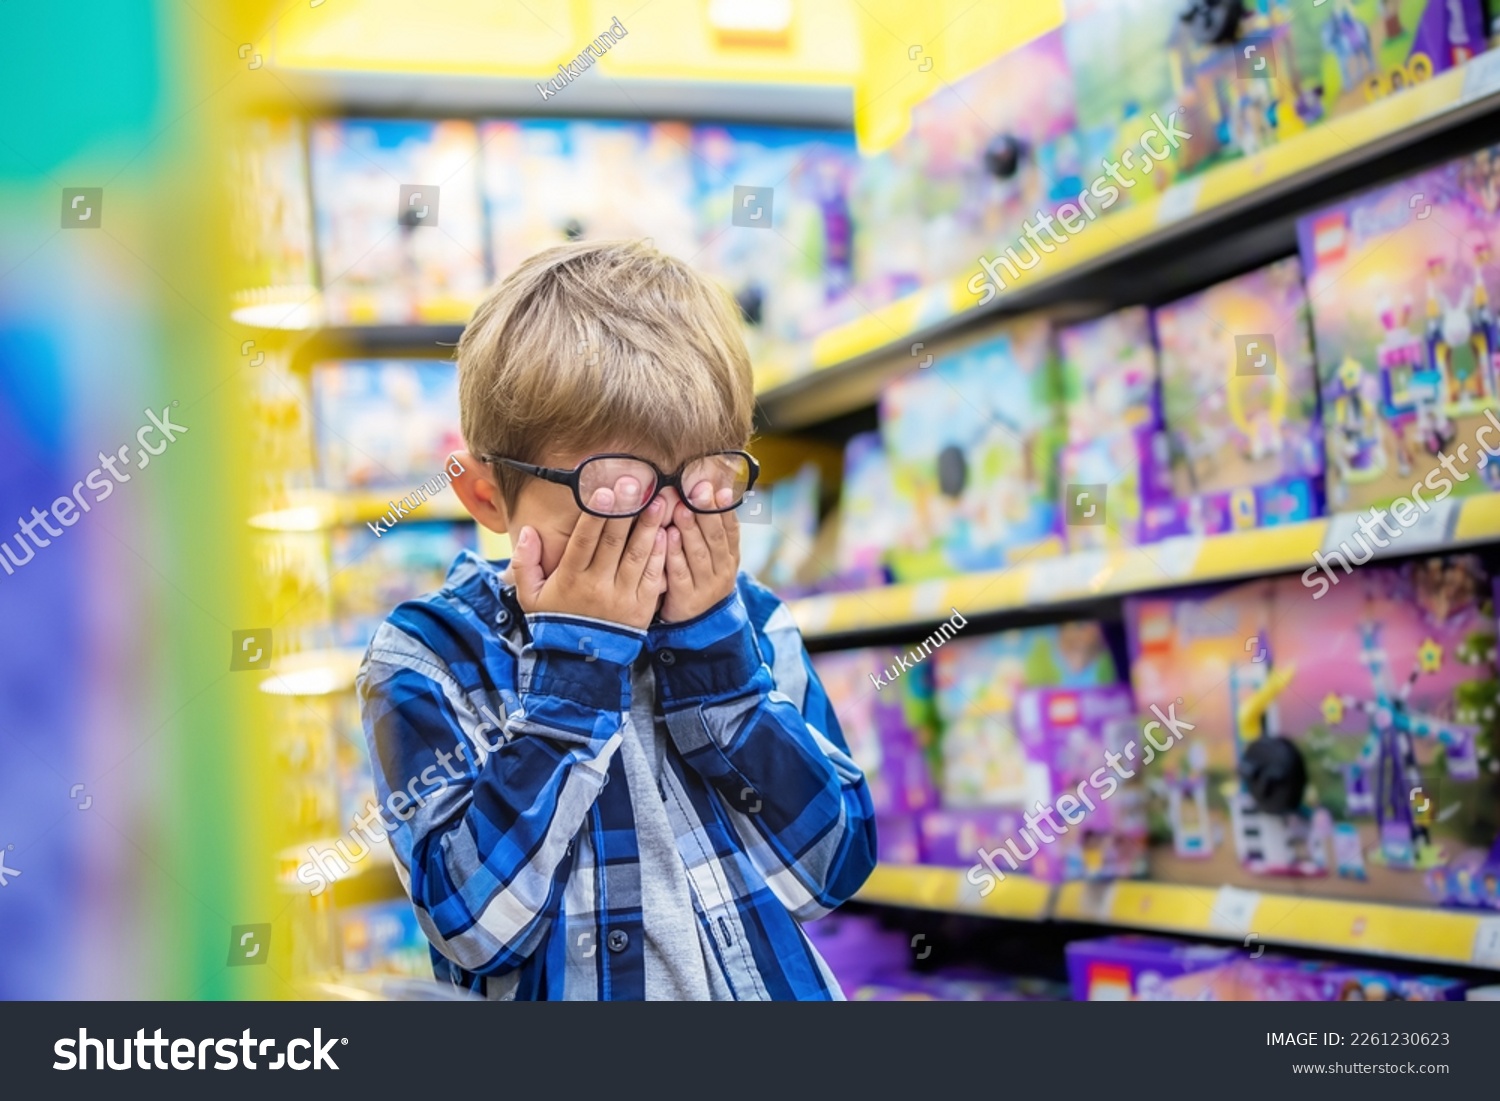 The little boy in the toy store is upset. The kid covered his eyes with his hands, crying. Child's tears in toy shop.  #2261230623